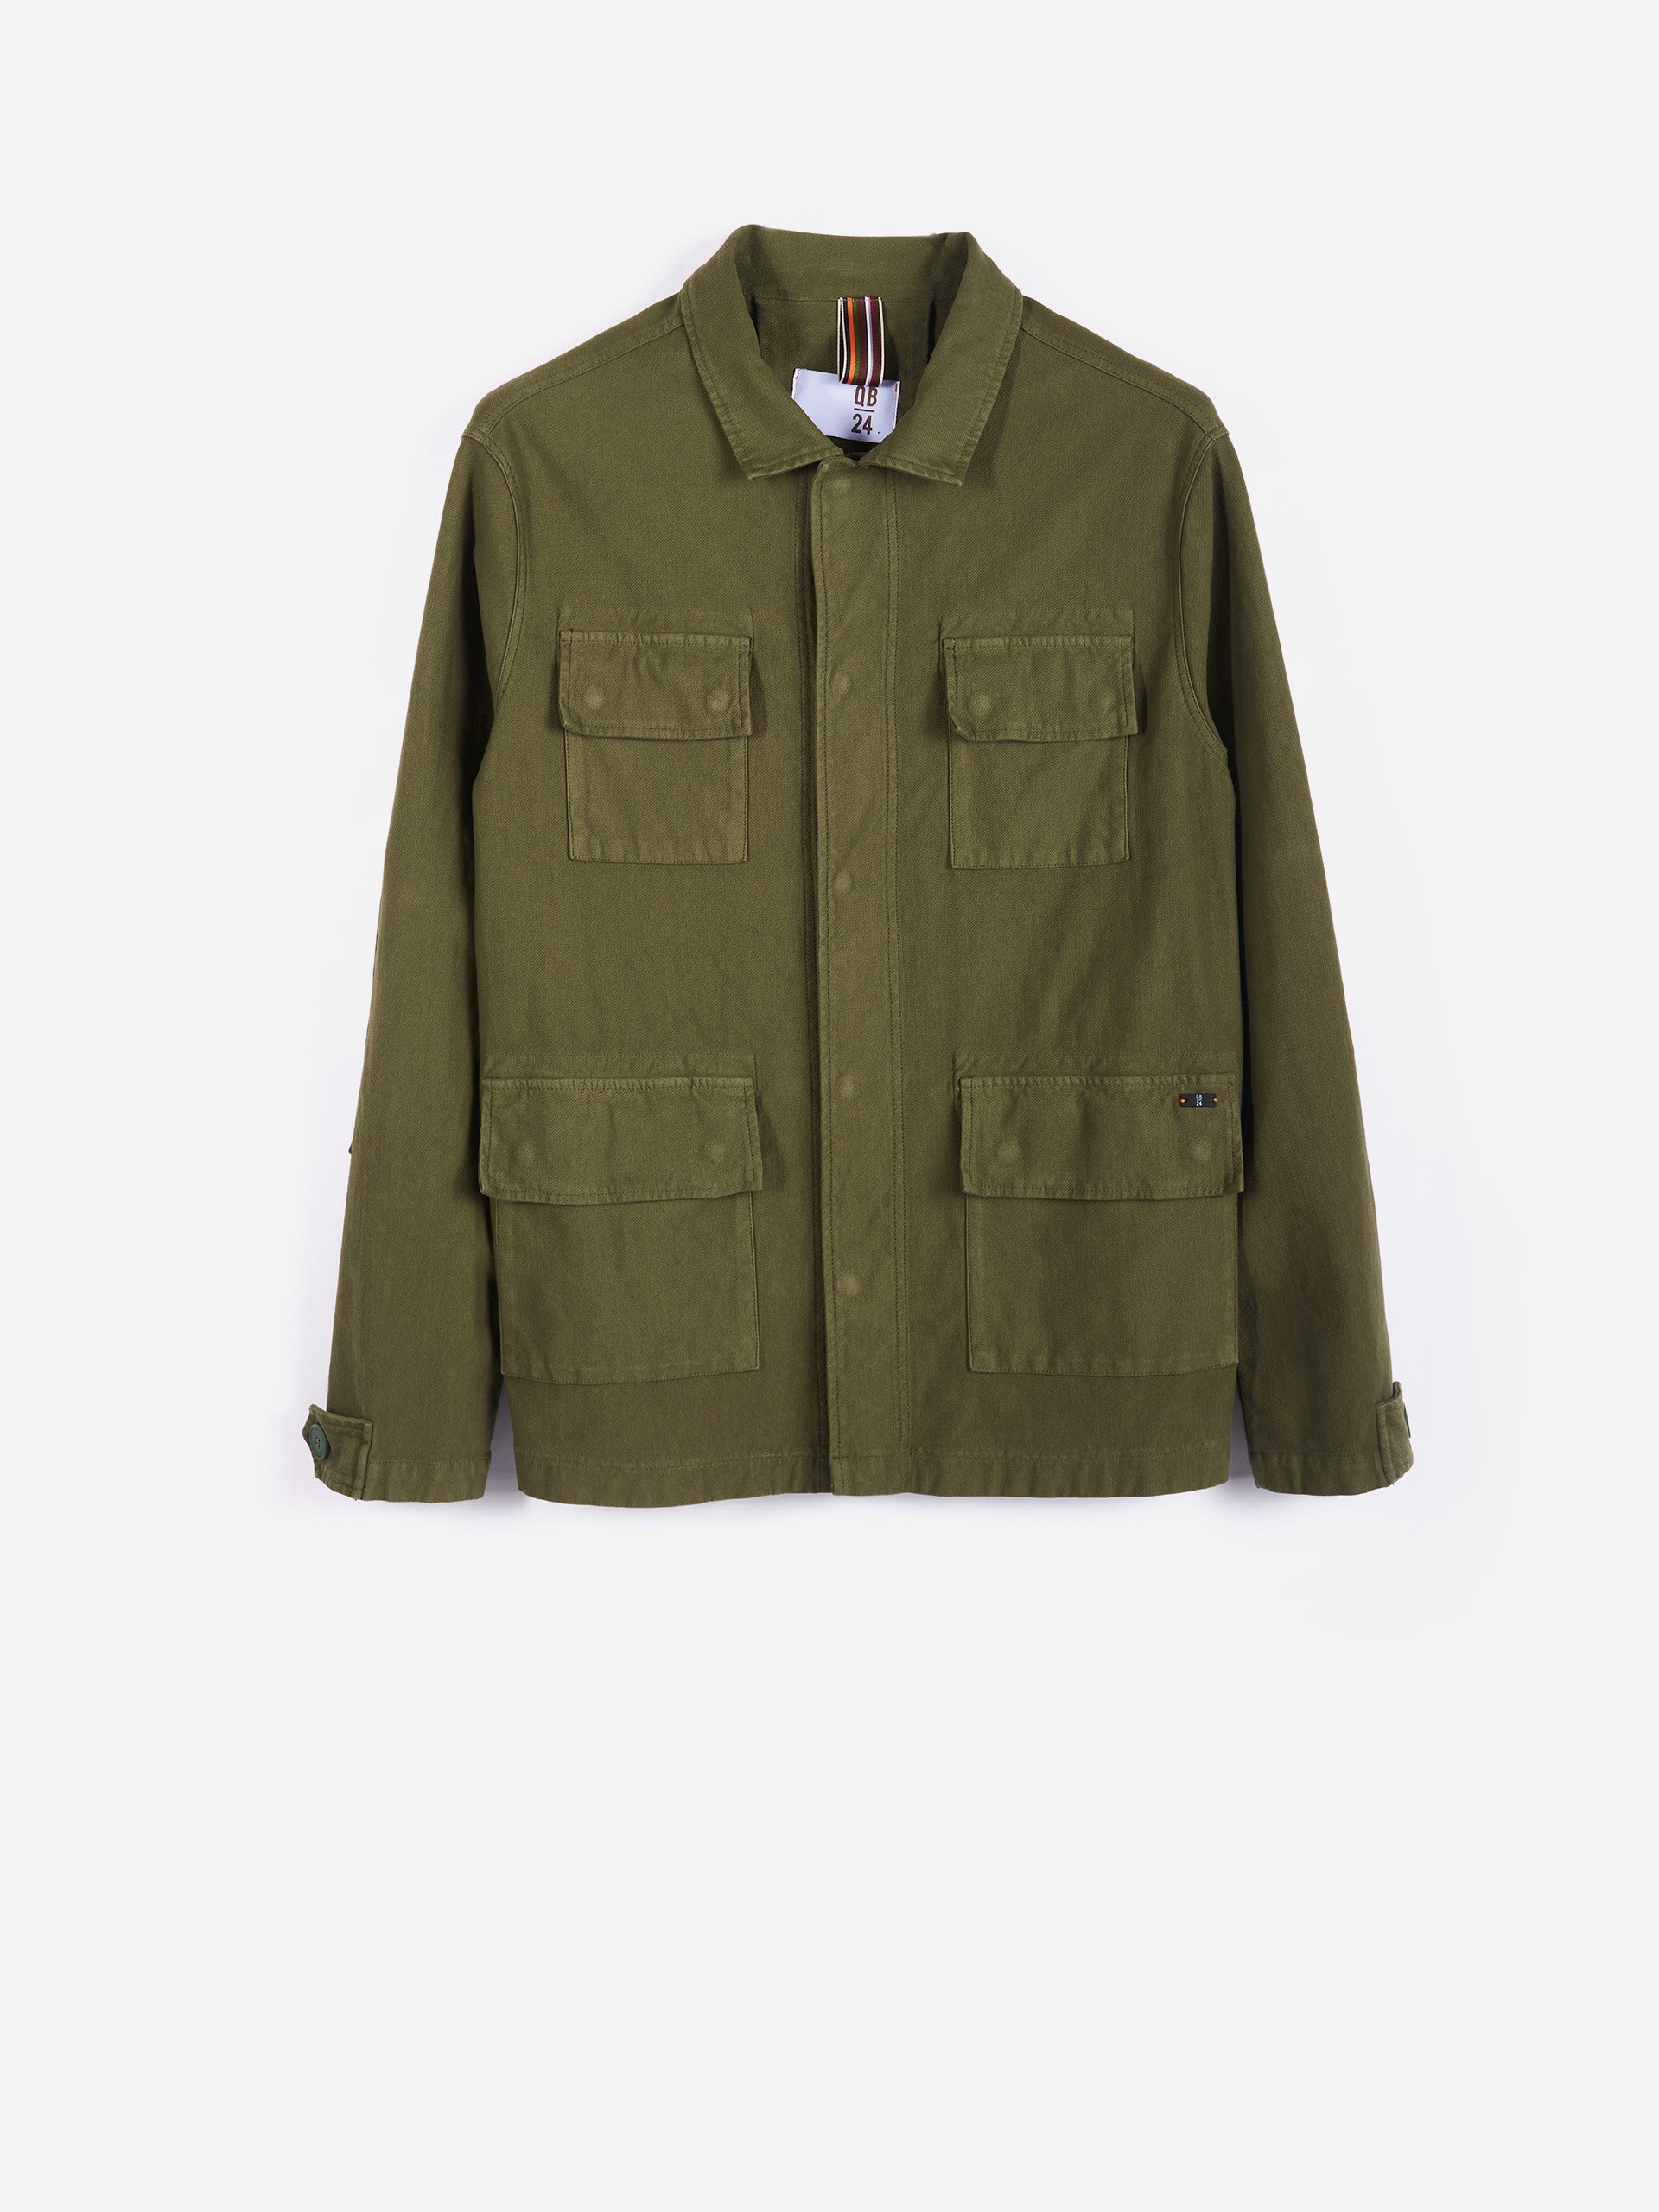 Another capp jacket